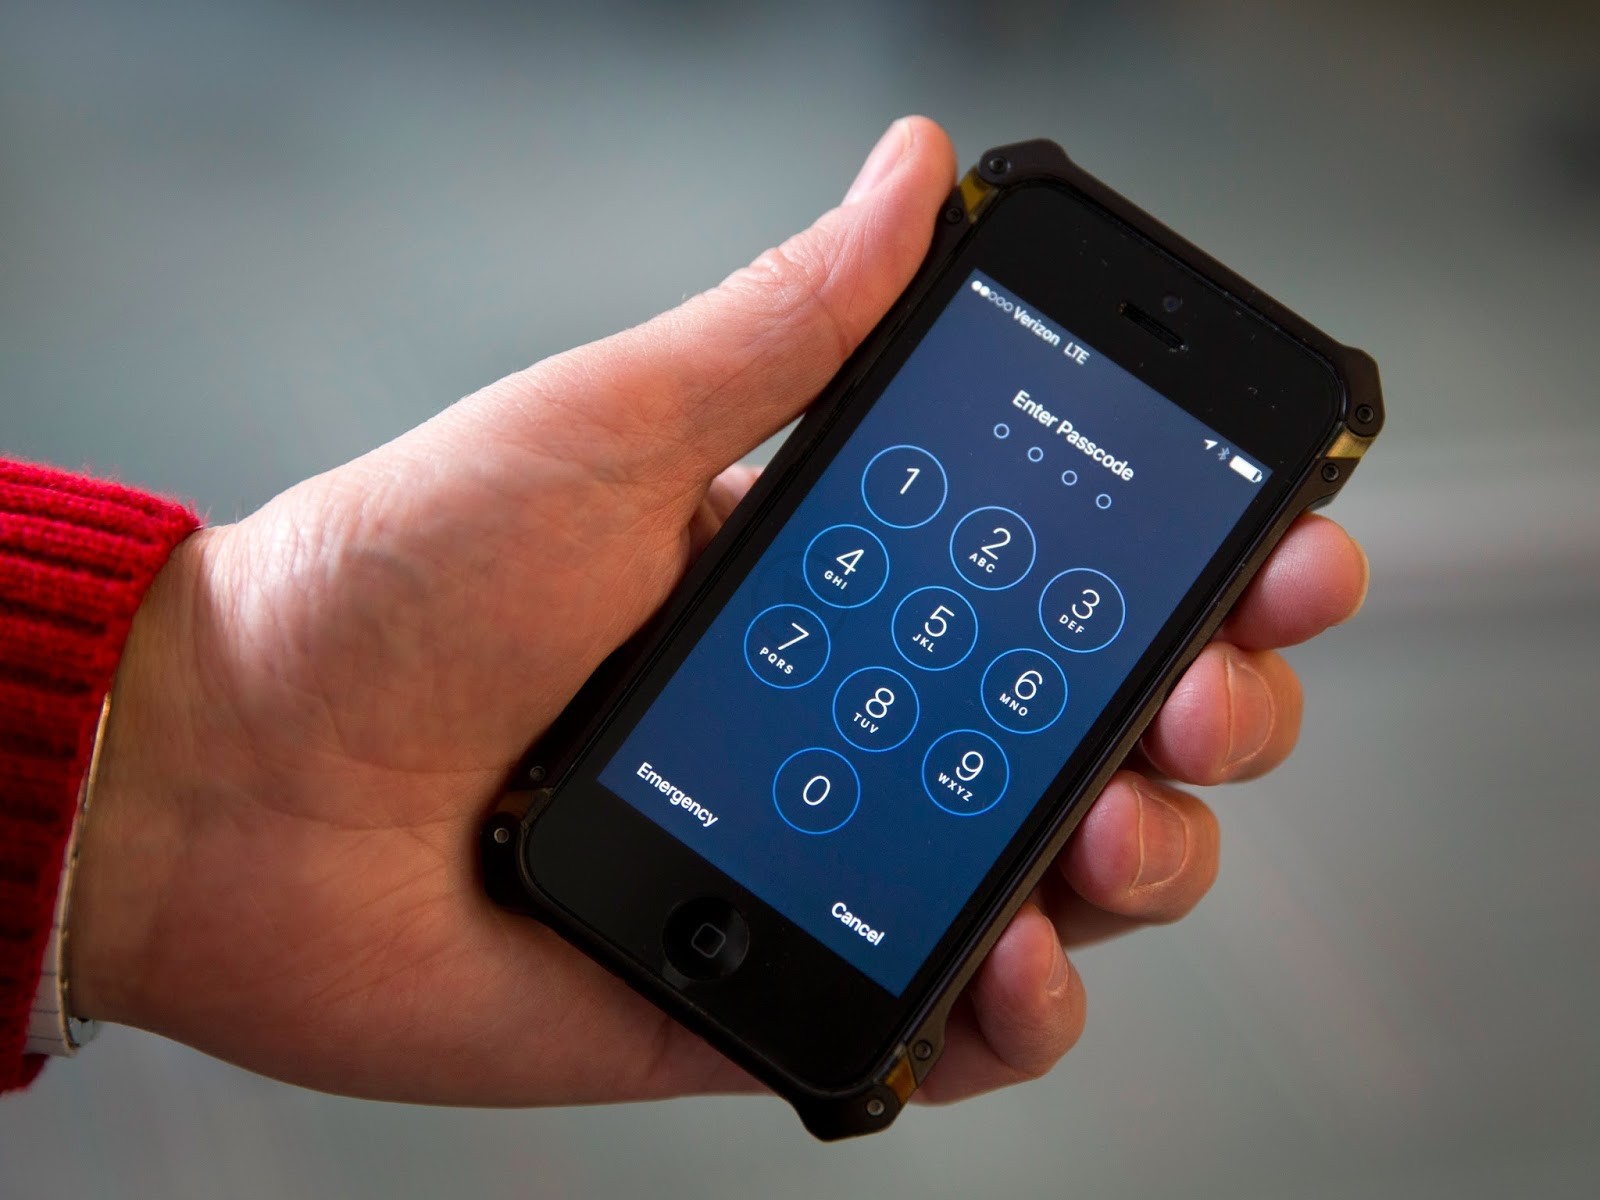 More Drama! FBI Pressurizes Apple Yet Again, This Time For A Different Case